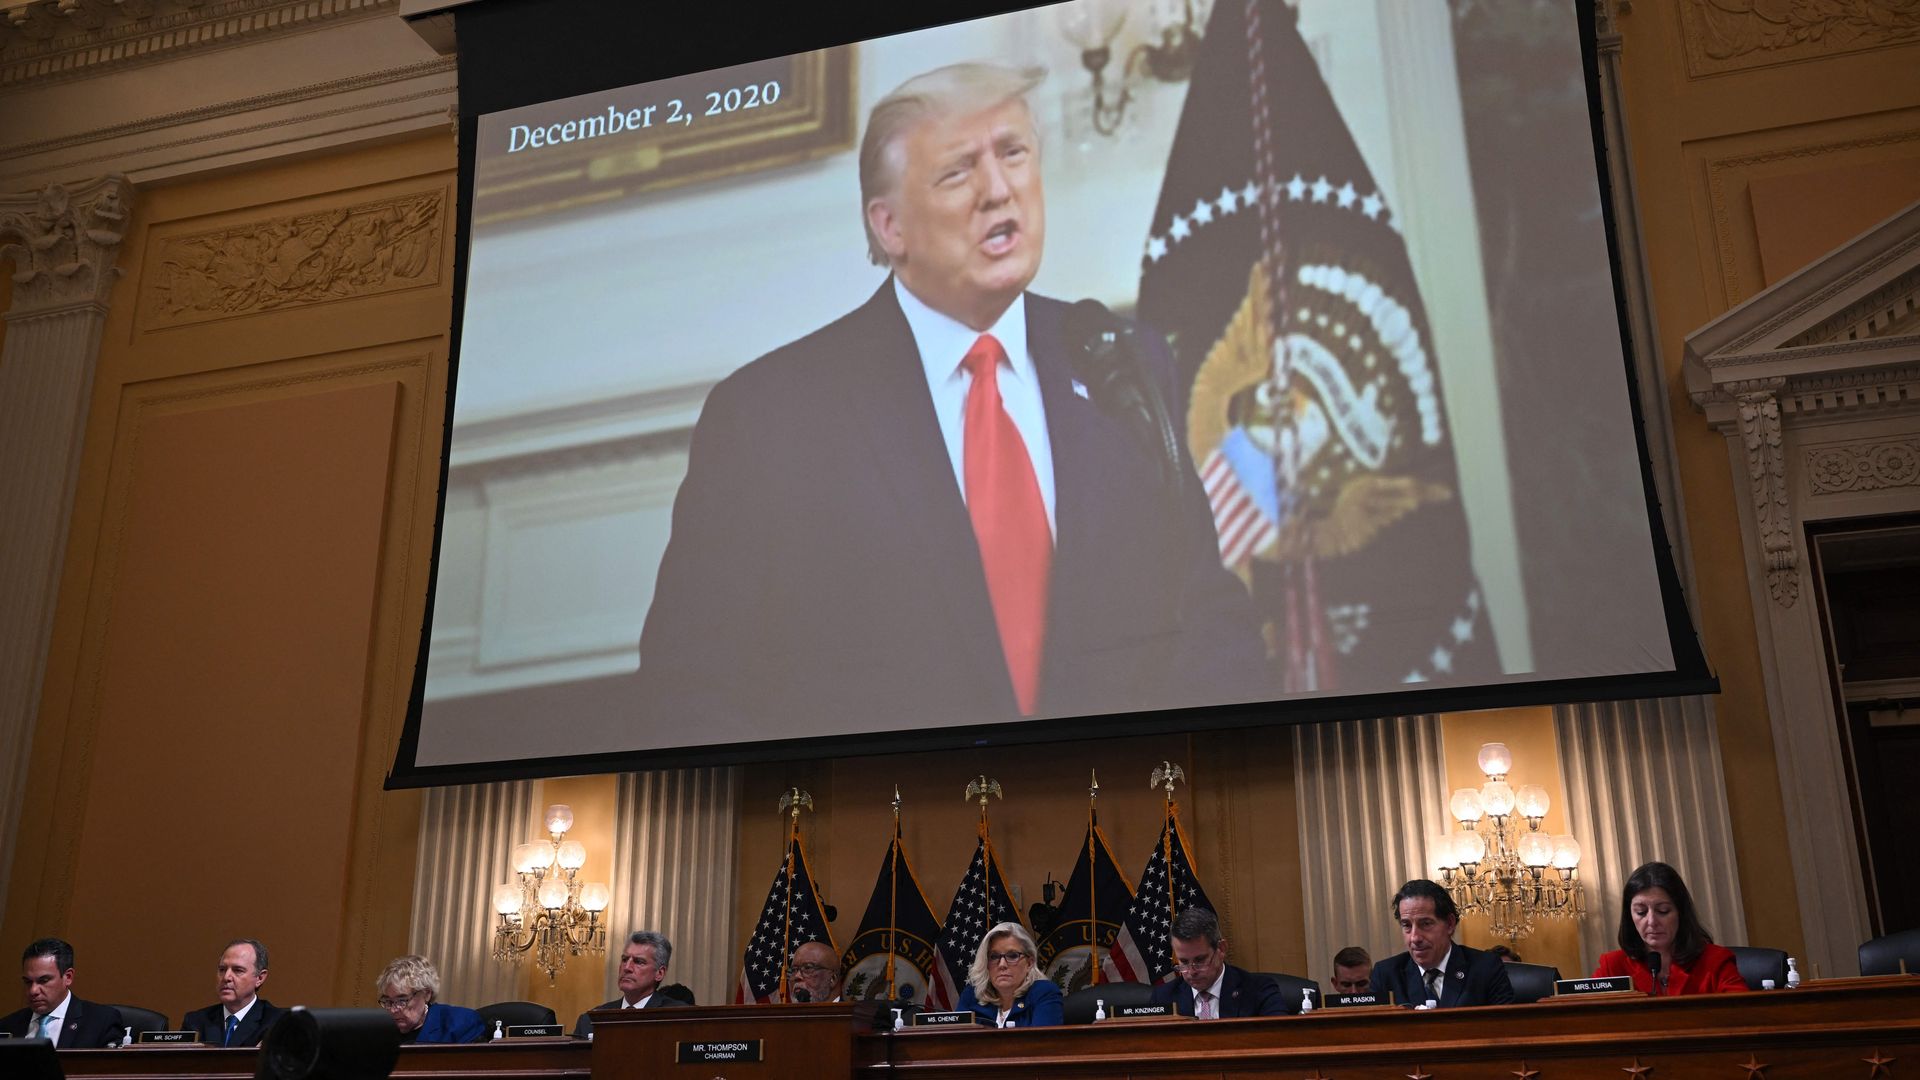 Jan. 6 committee shows footage of Donald Trump